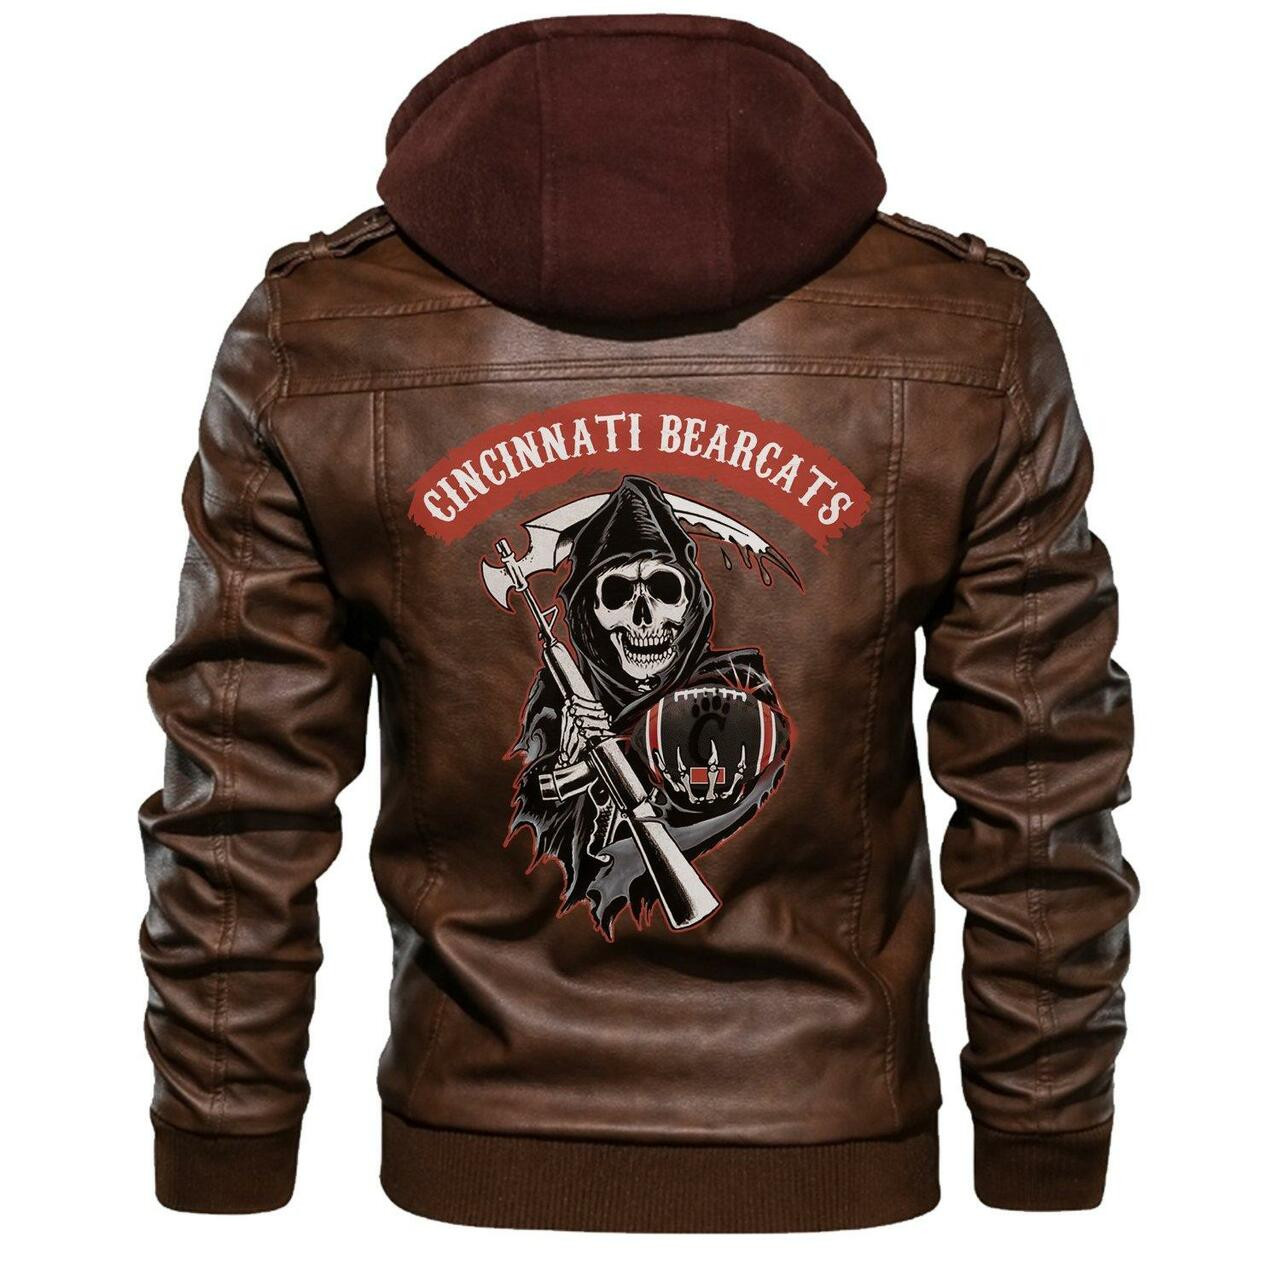 Check out and find the right leather jacket below 215